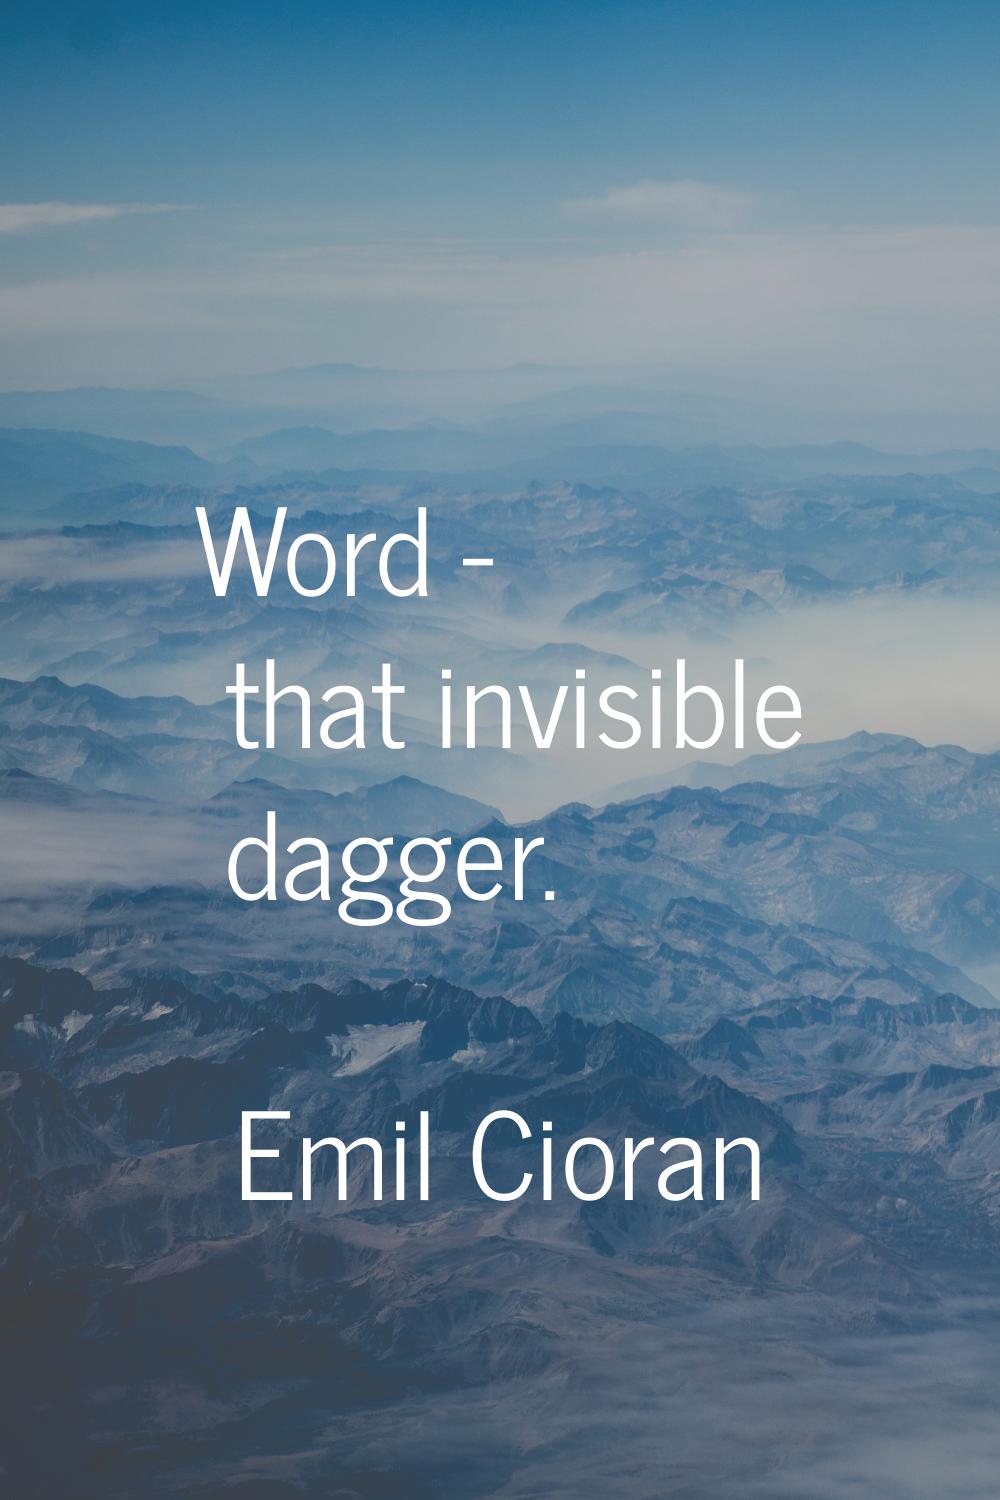 Word - that invisible dagger.